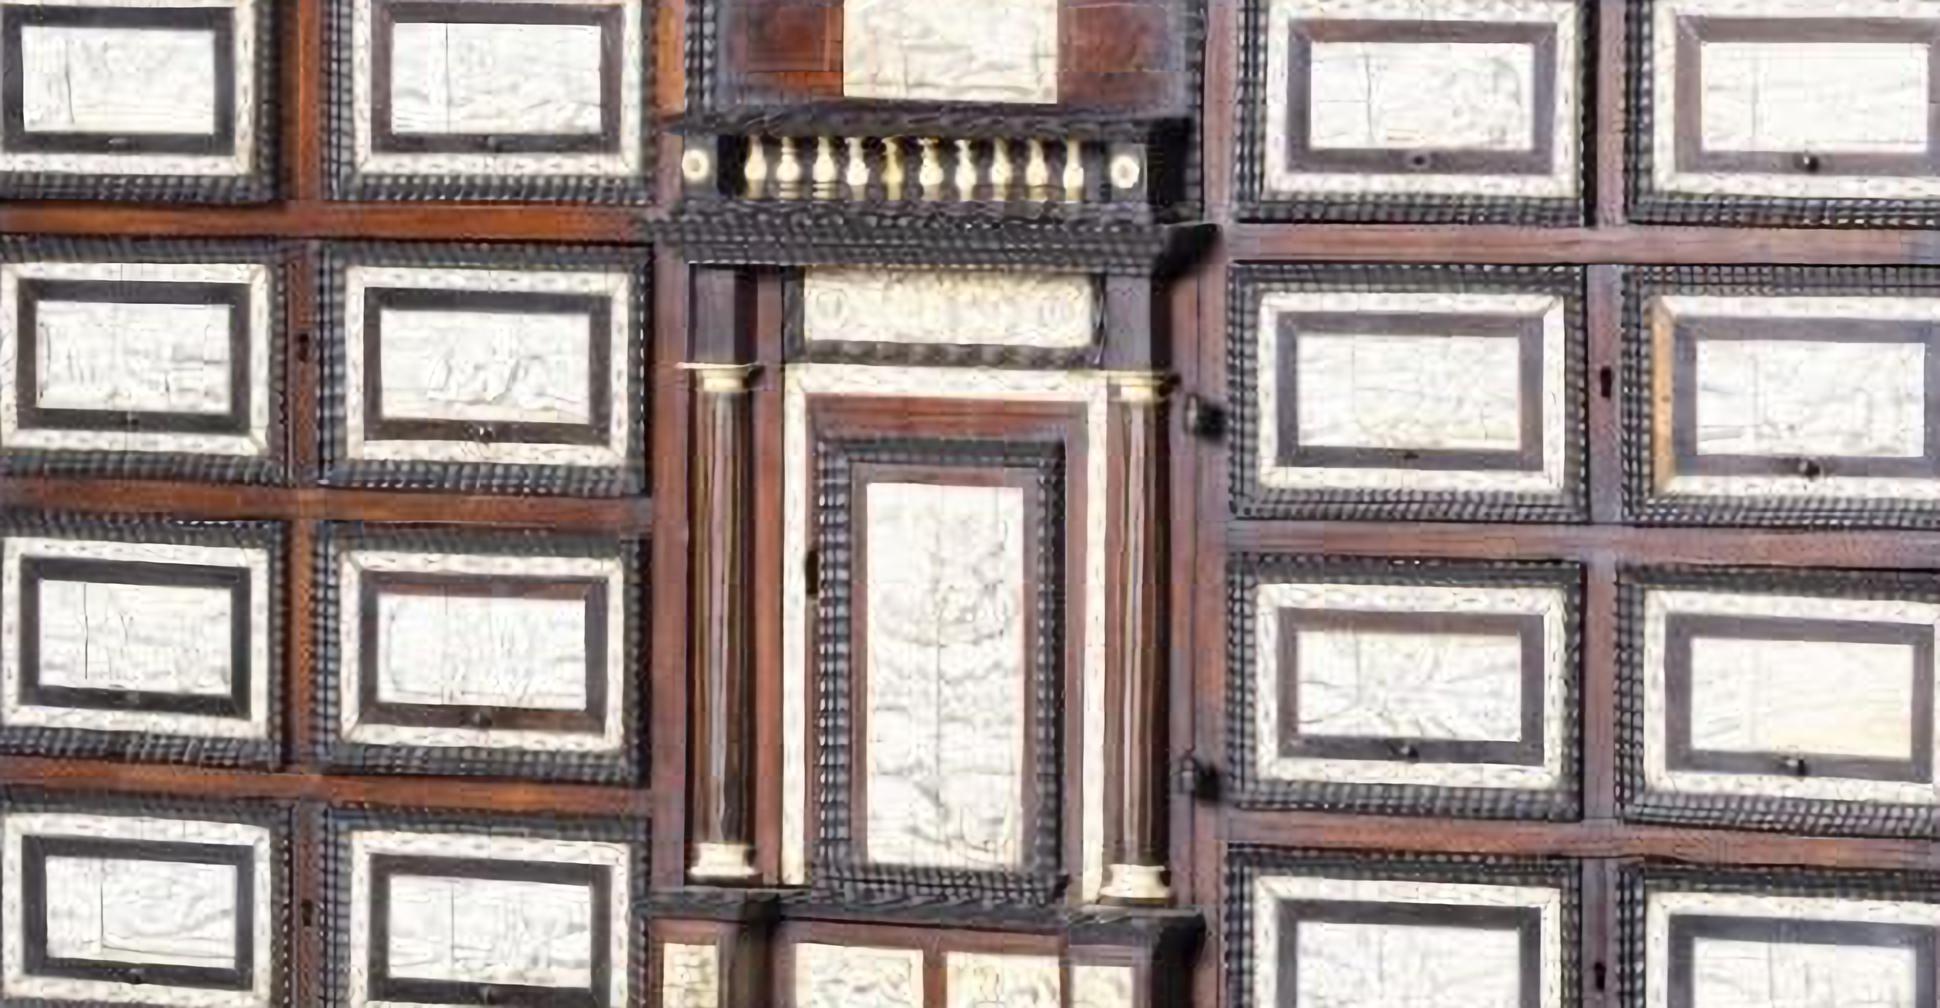 ITALIAN COUNTER/CABINET WITH TREMPE 19th Century
Italian, 19th century.
with ebony marquetry, ebonized wood with engraved ivory applications, decorated with 